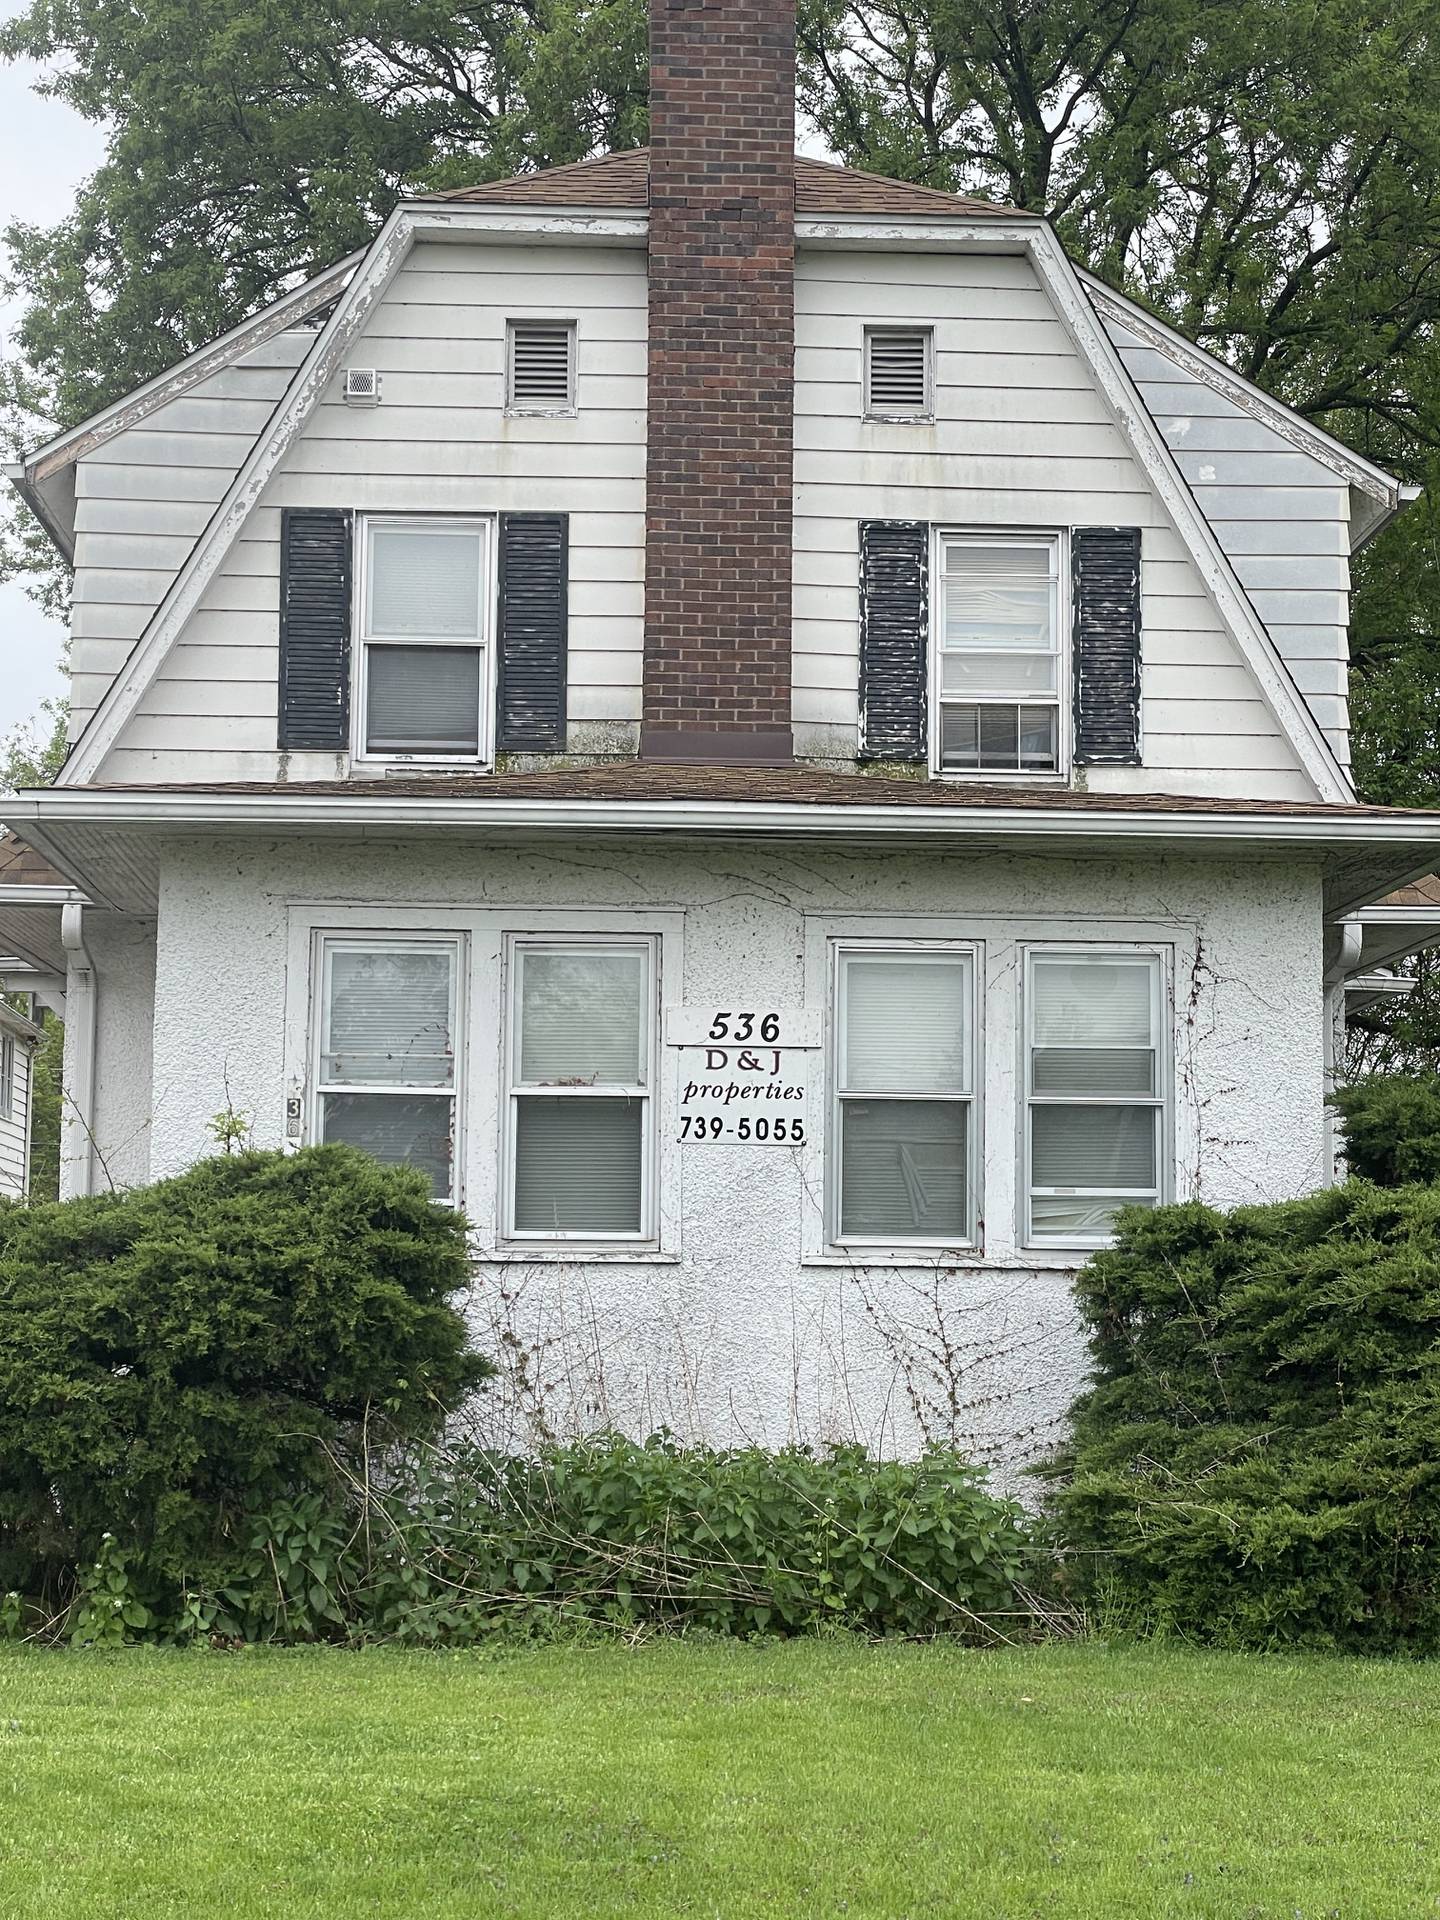 A home in the 500 block of College Avenue in DeKalb (shown here Monday, May 8, 2023) is the place where police say Timothy Doll, 29, allegedly murdered 15-year-old Gracie Sasso-Cleveland May 4, 2023. Doll is charged with two counts of first degree murder in the DeKalb High School freshman's death. Police allege Doll suffocated Sasso-Cleveland and then discarded her body in a nearby dumpster.  She was found dead by police Sunday, May 7, 2023.